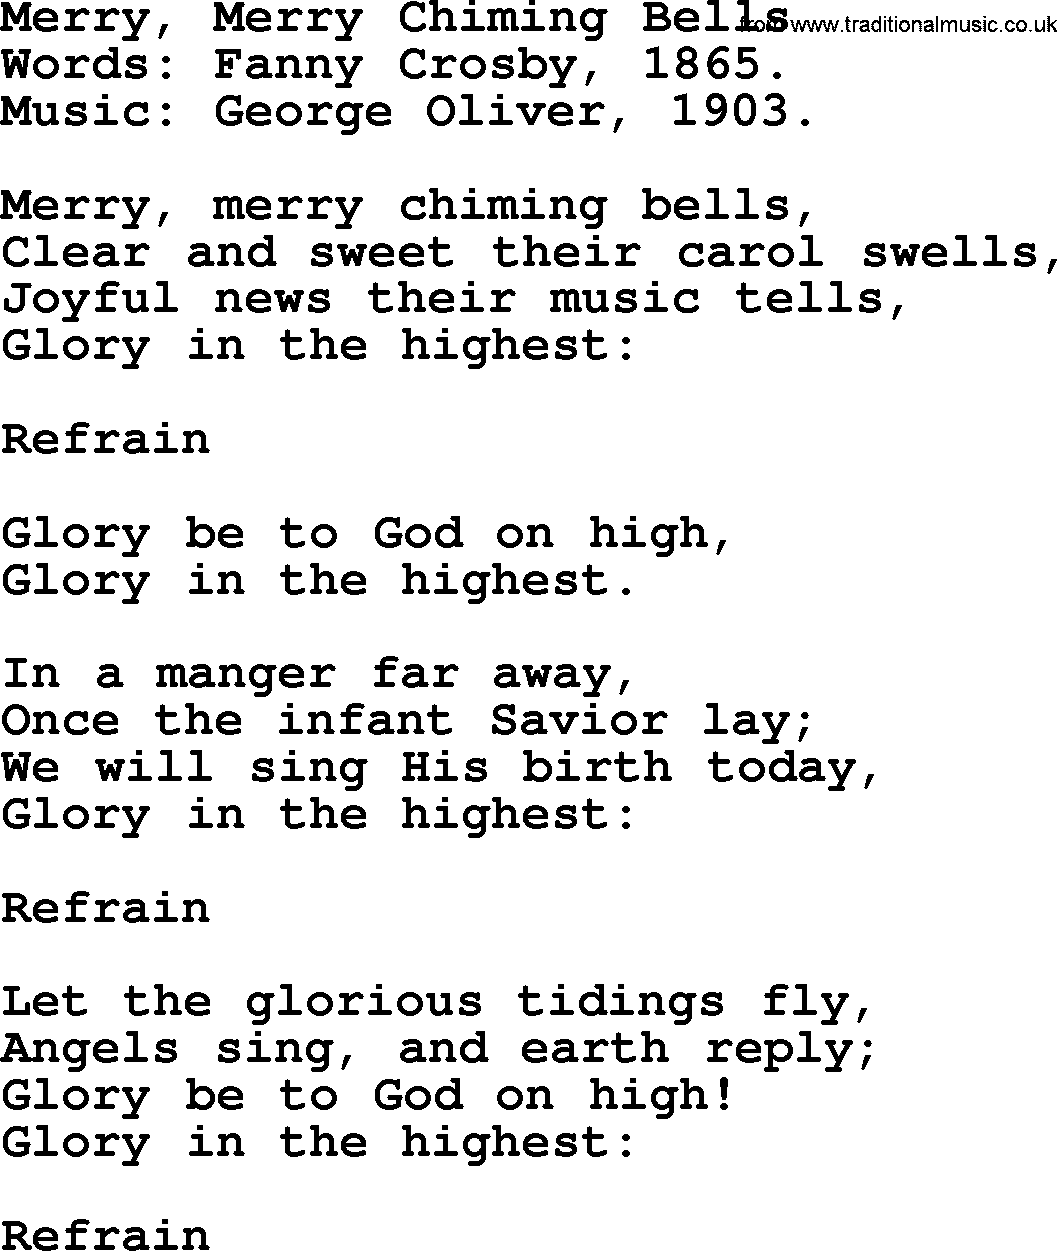 Christmas Hymns, Carols and Songs, title: Merry, Merry Chiming Bells, lyrics with PDF